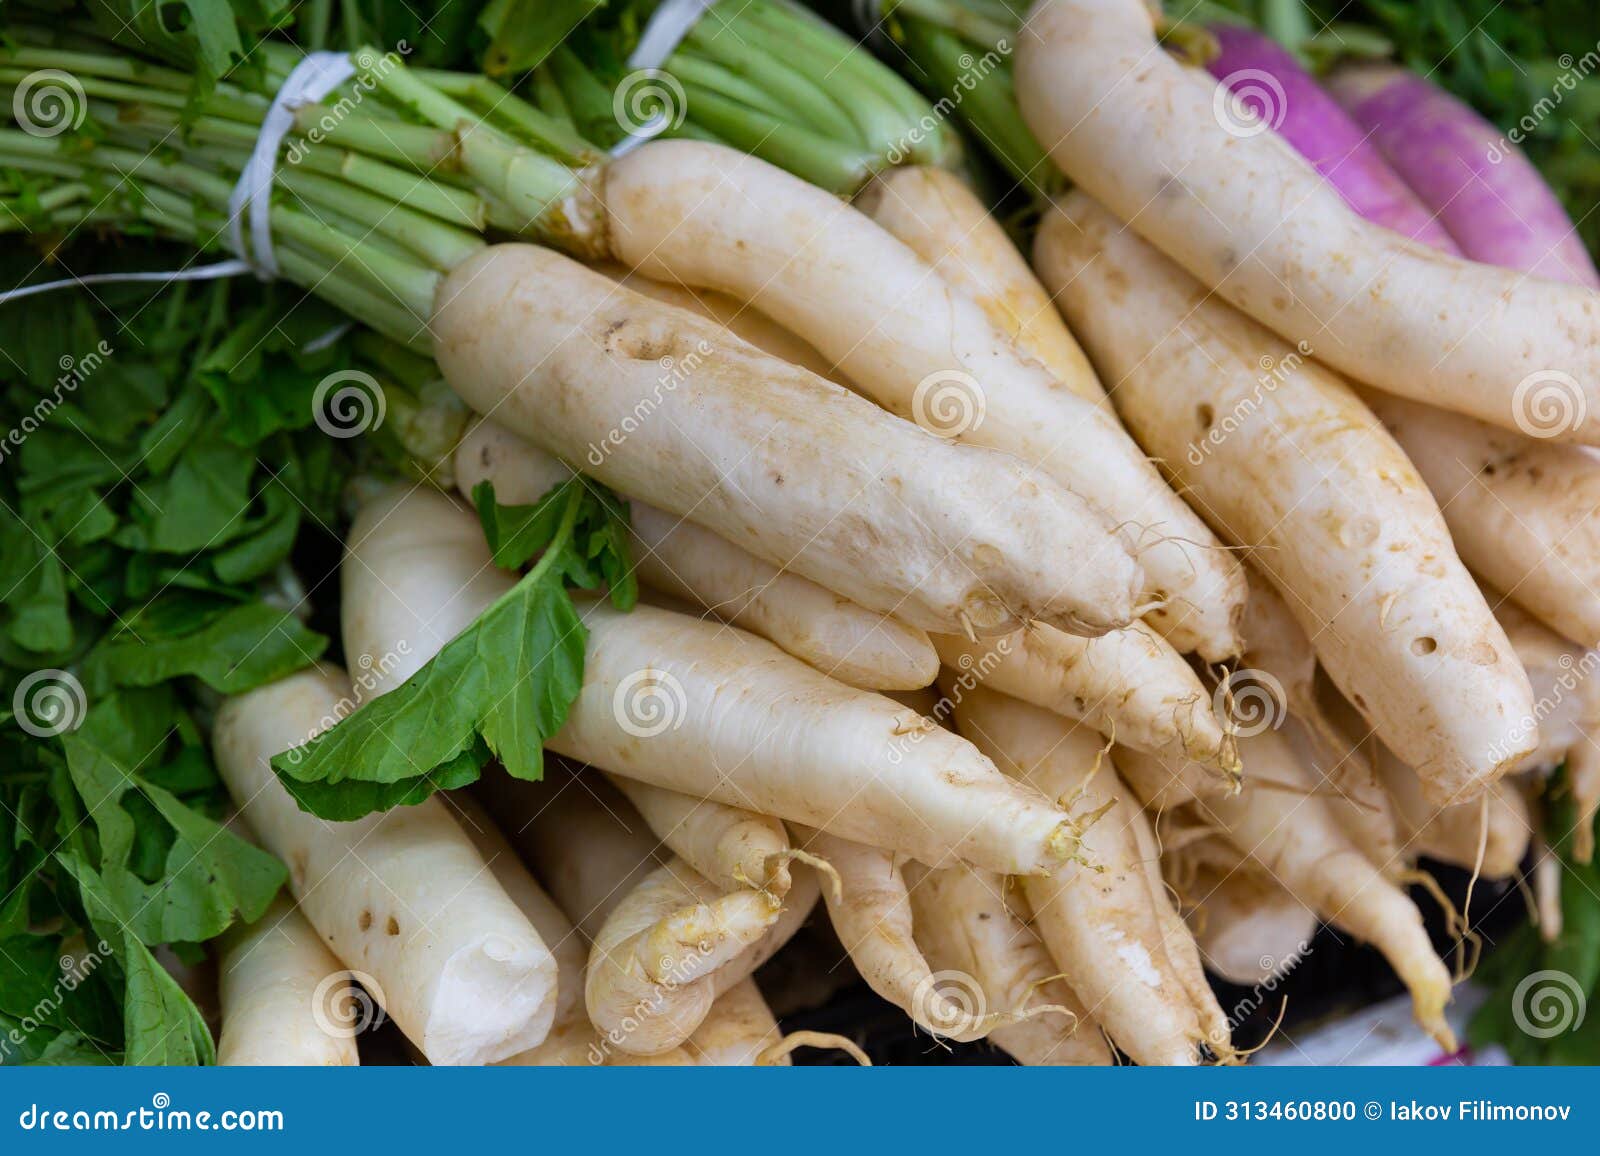 white radish in boxes on counter